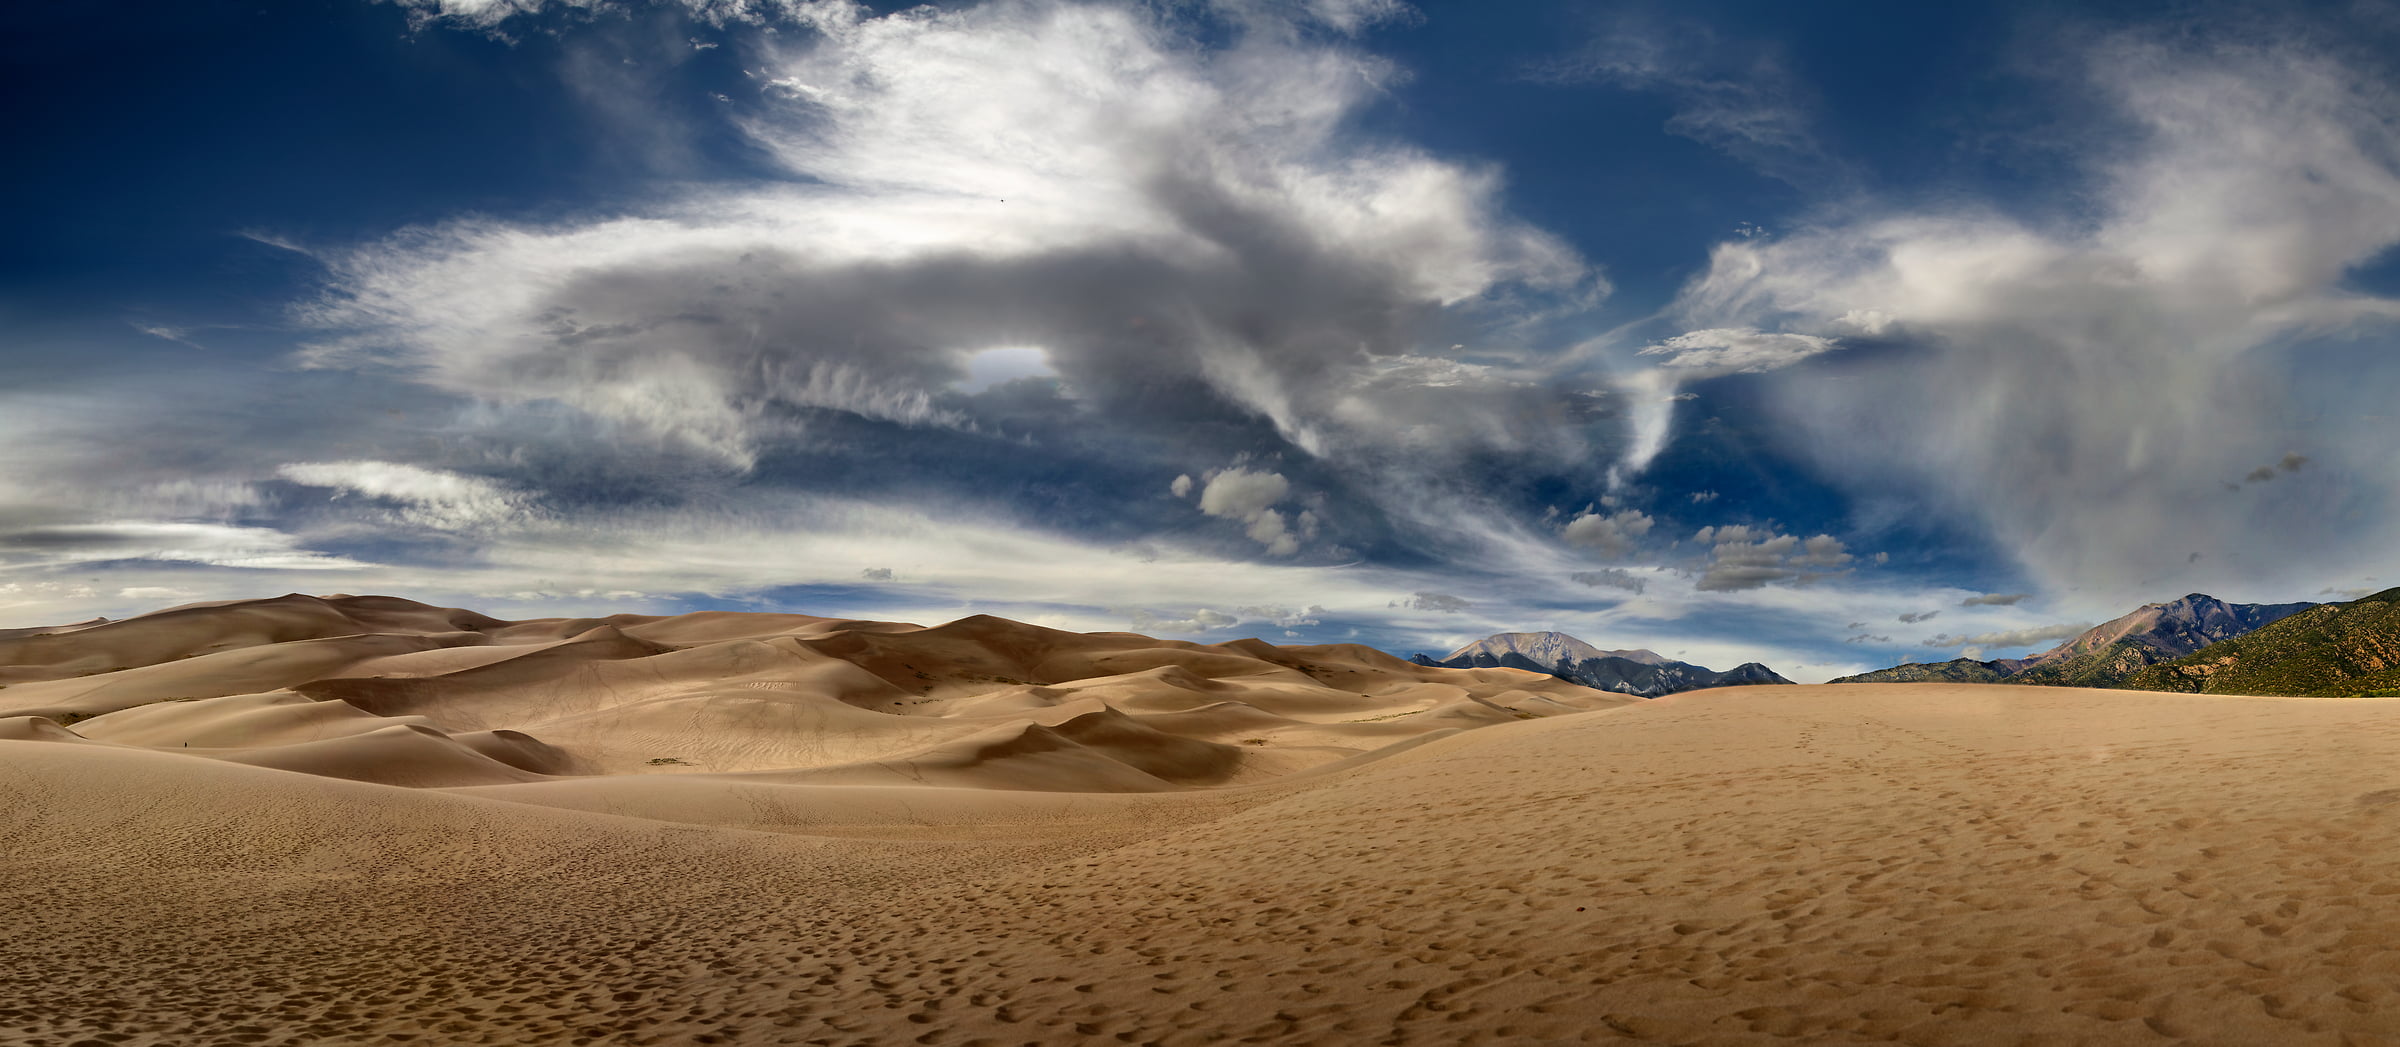 330 megapixels! A very high resolution landscape photo of desert sand dunes; VAST photo created by Phil Crawshay in Great Sand Dunes National Park, Colorado, USA